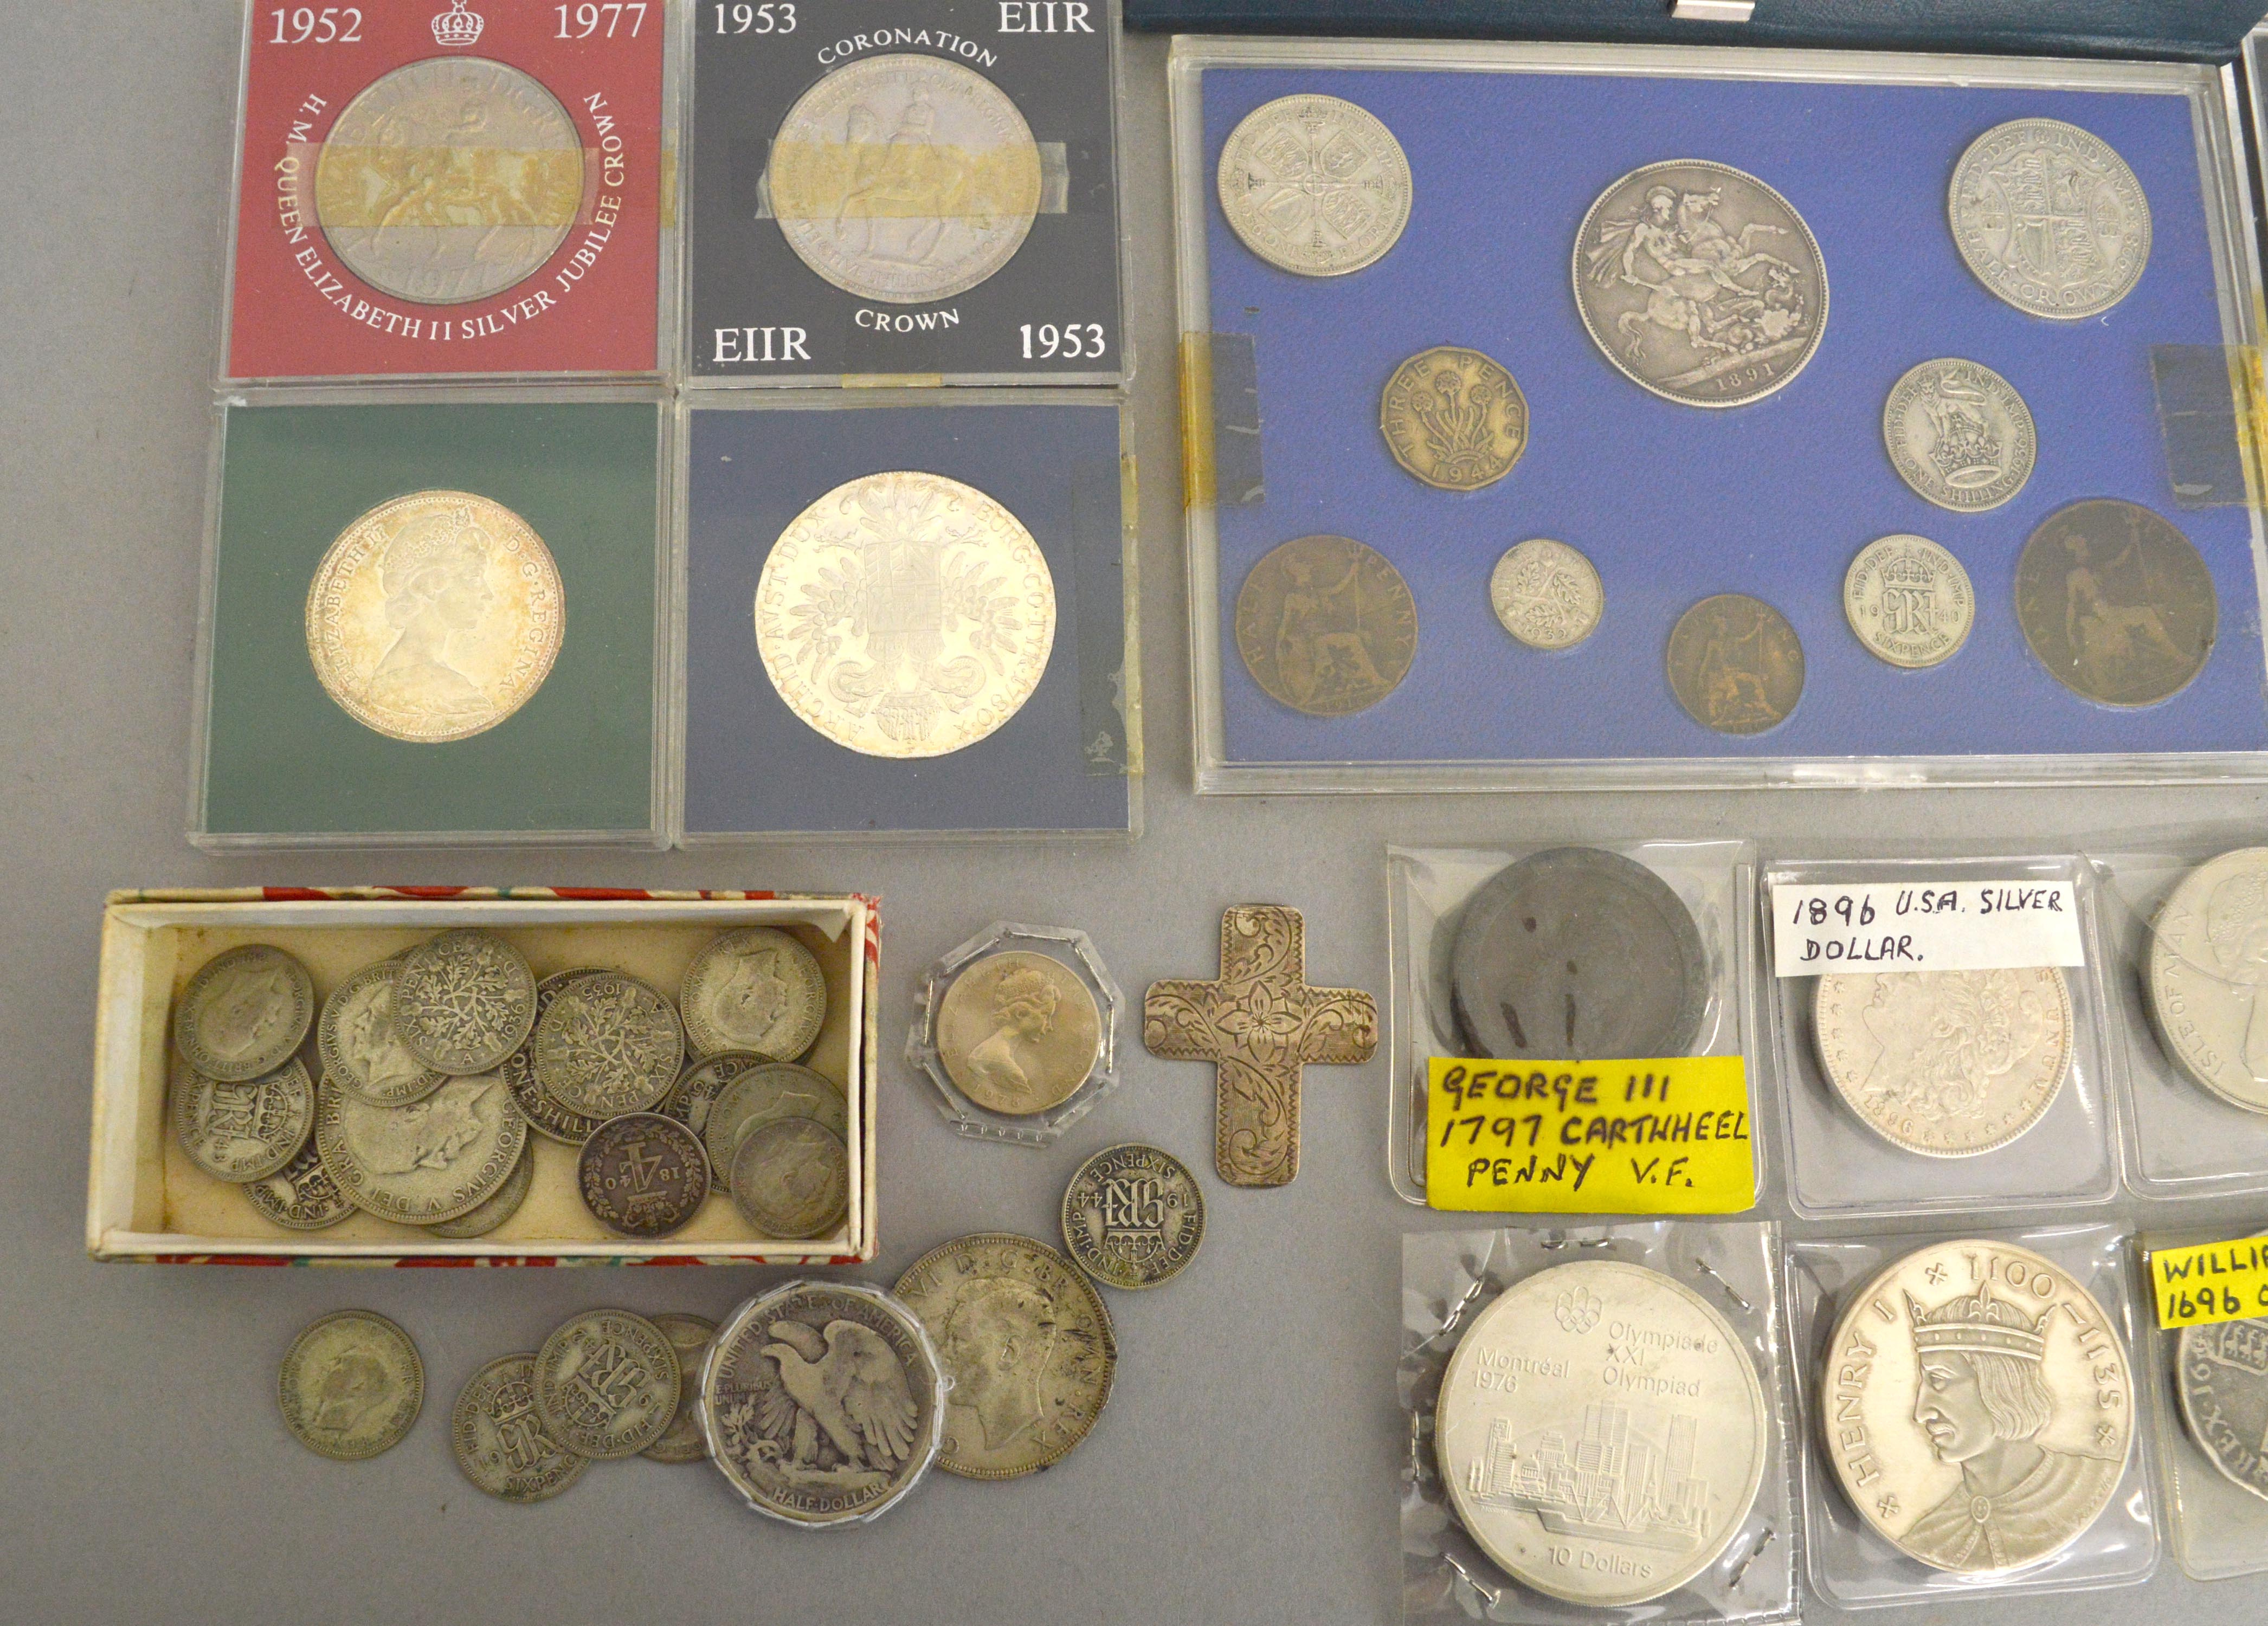 A quantity of coins & medallions to include 1986 proof coin set, 1696 William III crown (fair), - Image 2 of 3